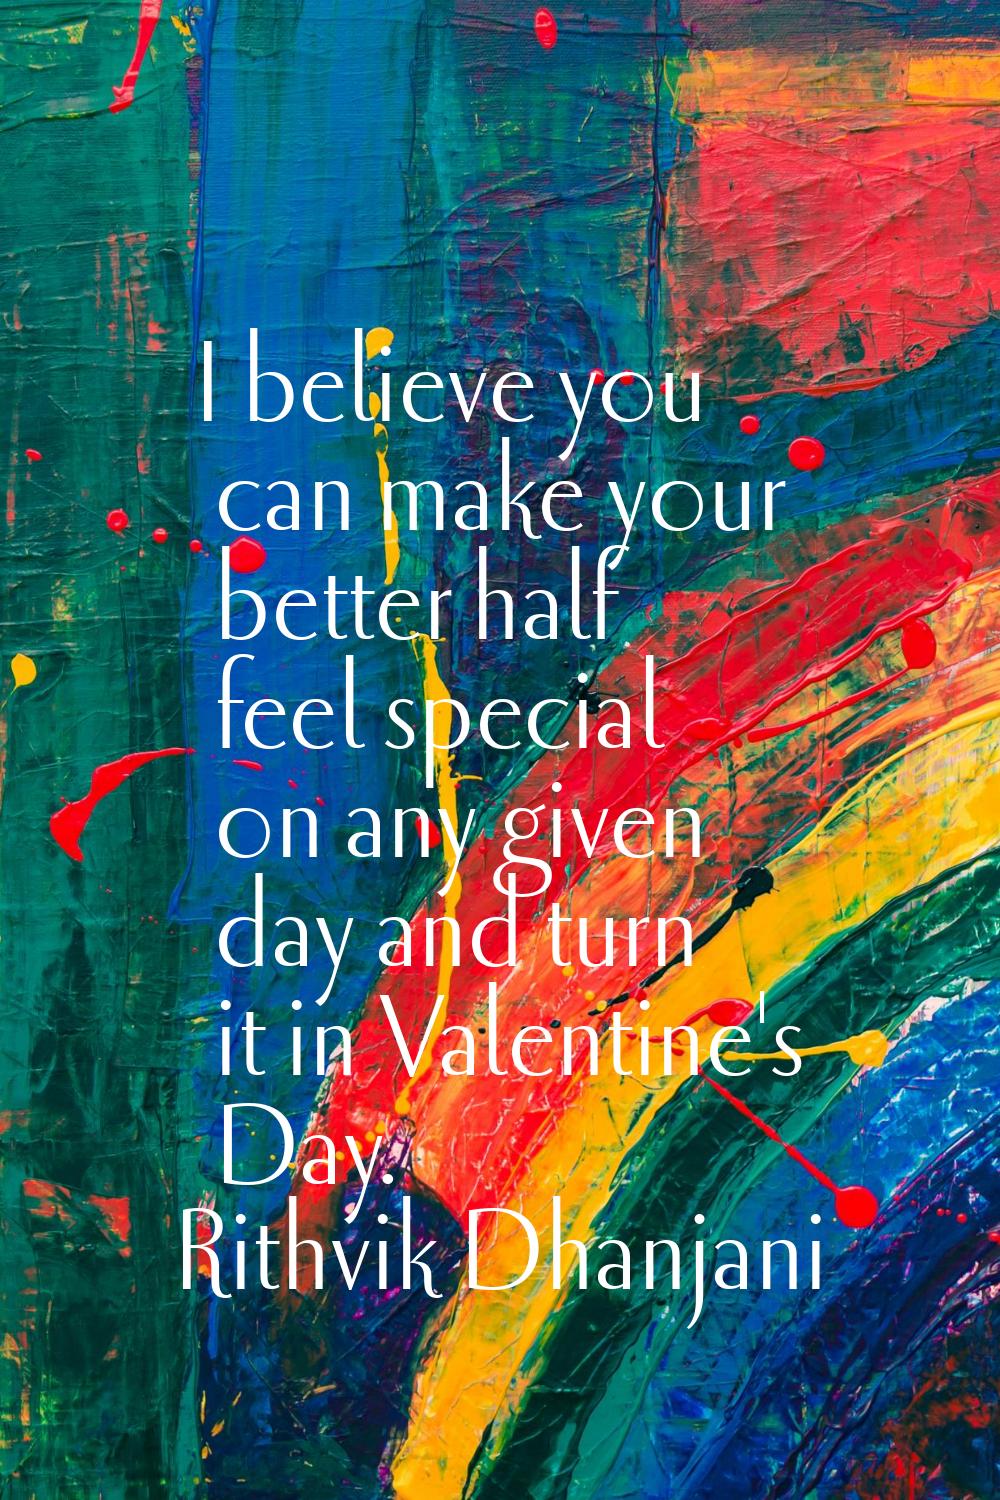 I believe you can make your better half feel special on any given day and turn it in Valentine's Da